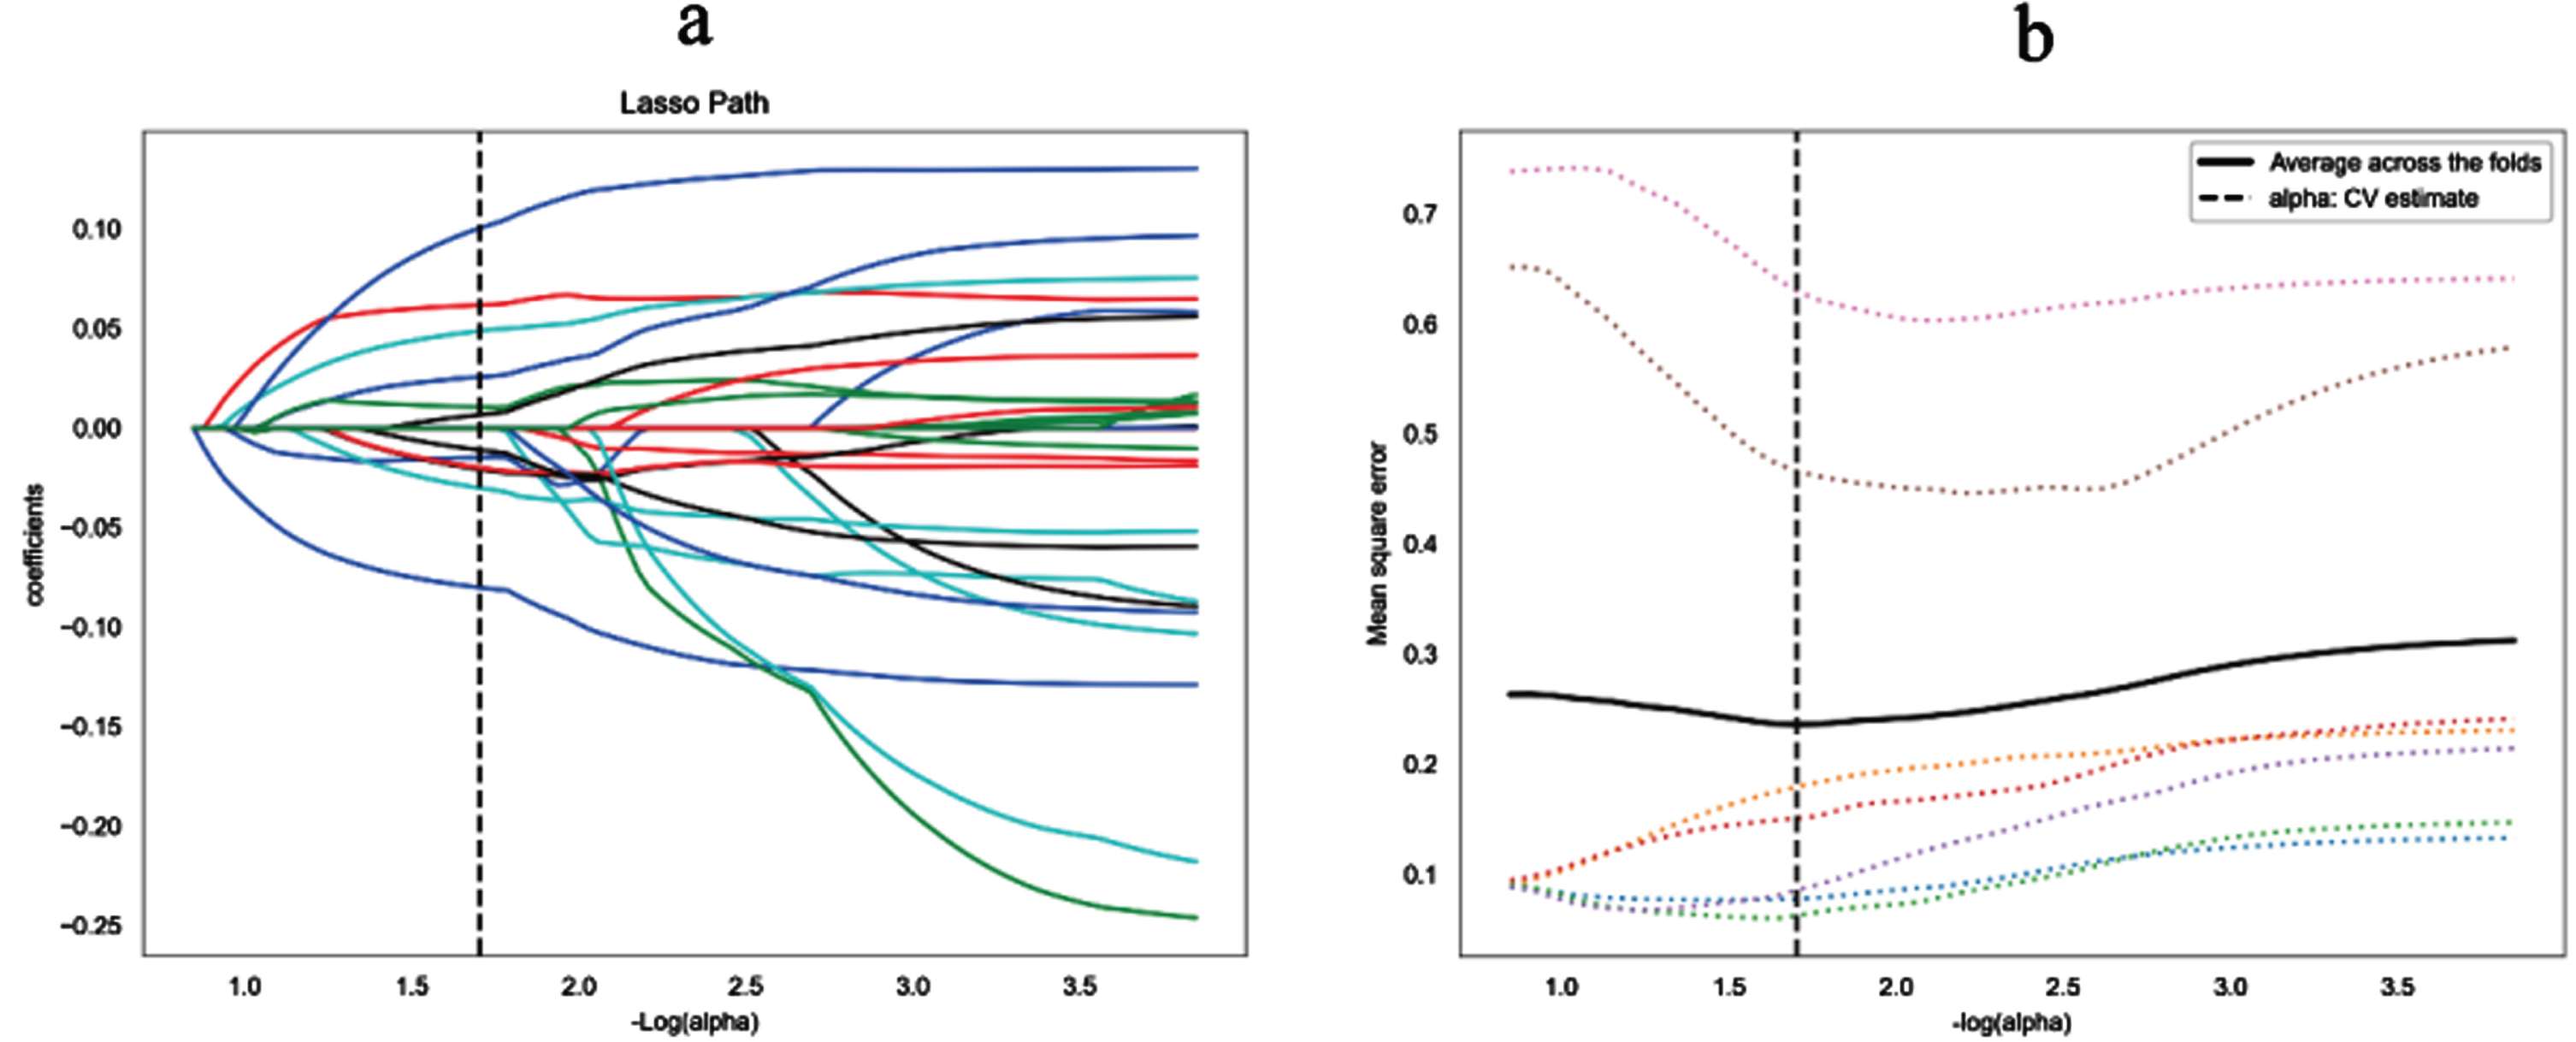 Lasso algorithm for radiomics features selection. (a) Least absolute shrinkage and selection operator (LASSO) coeffificient profifiles of the 33 features. The y-axis represents coeffificient of each feature. The optimal value of alpha was 0.0198, and the optimal -log(alpha) was 1.7, where 13 features with non-zero coeffificient were selected. (b) Mean square error path using seven-fold cross-validation.